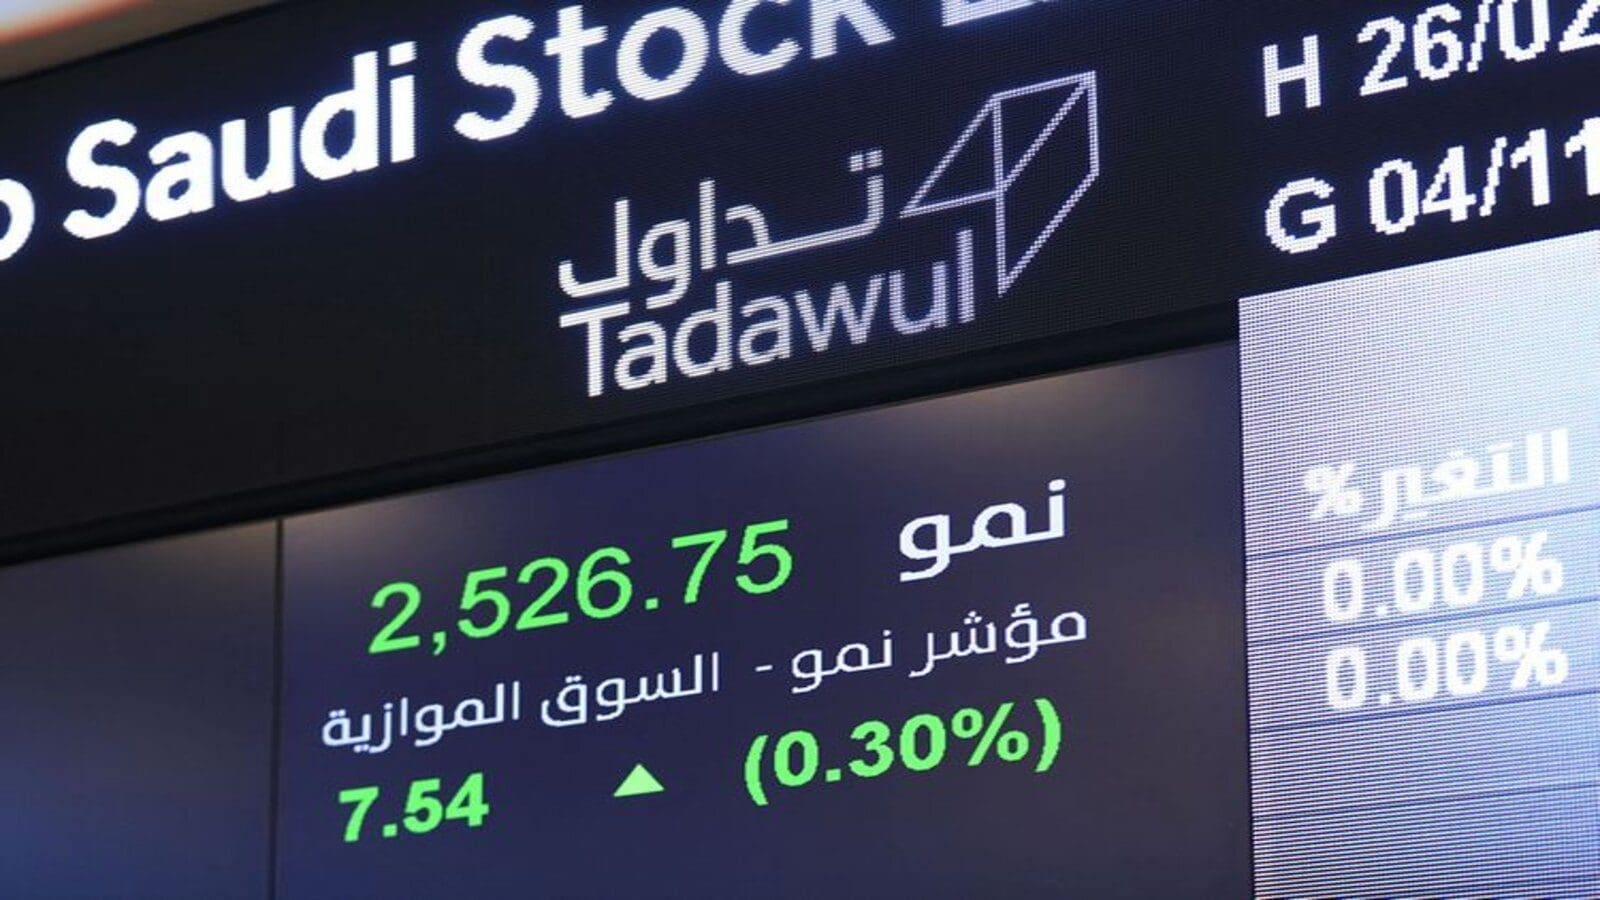 First Milling Company to offer 30% share capital through IPO on the Saudi Exchange